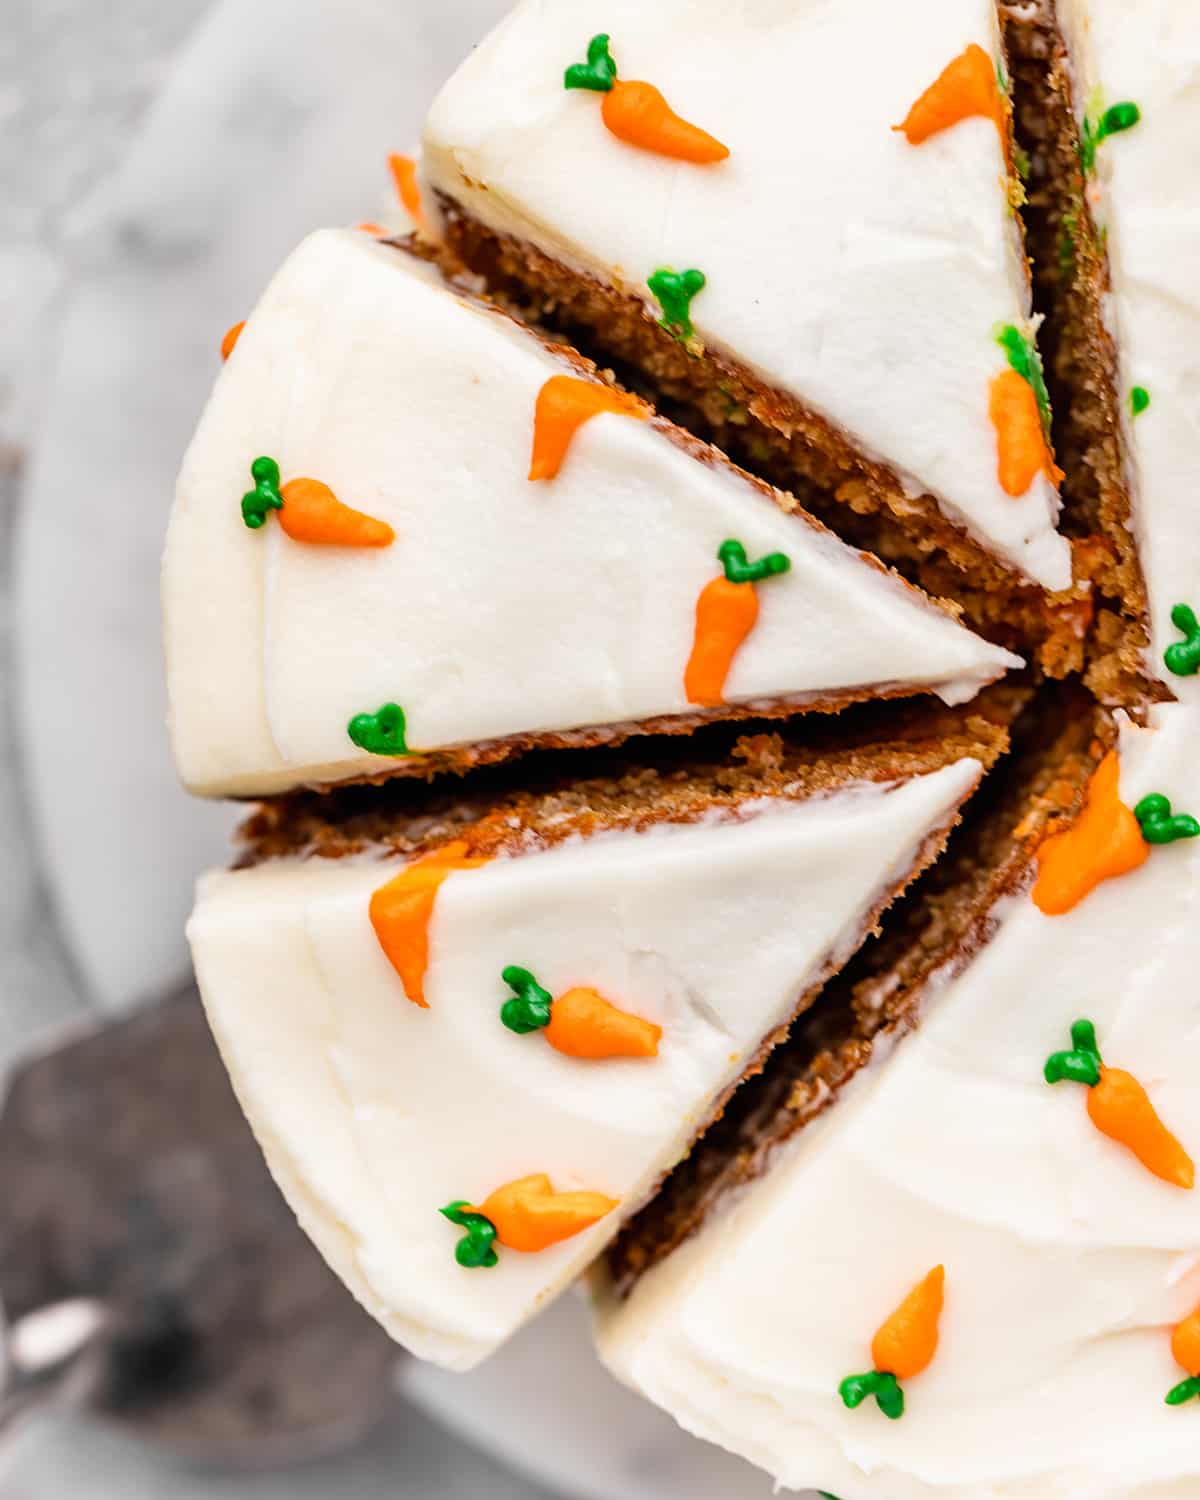 3 slices cut out of a carrot cake